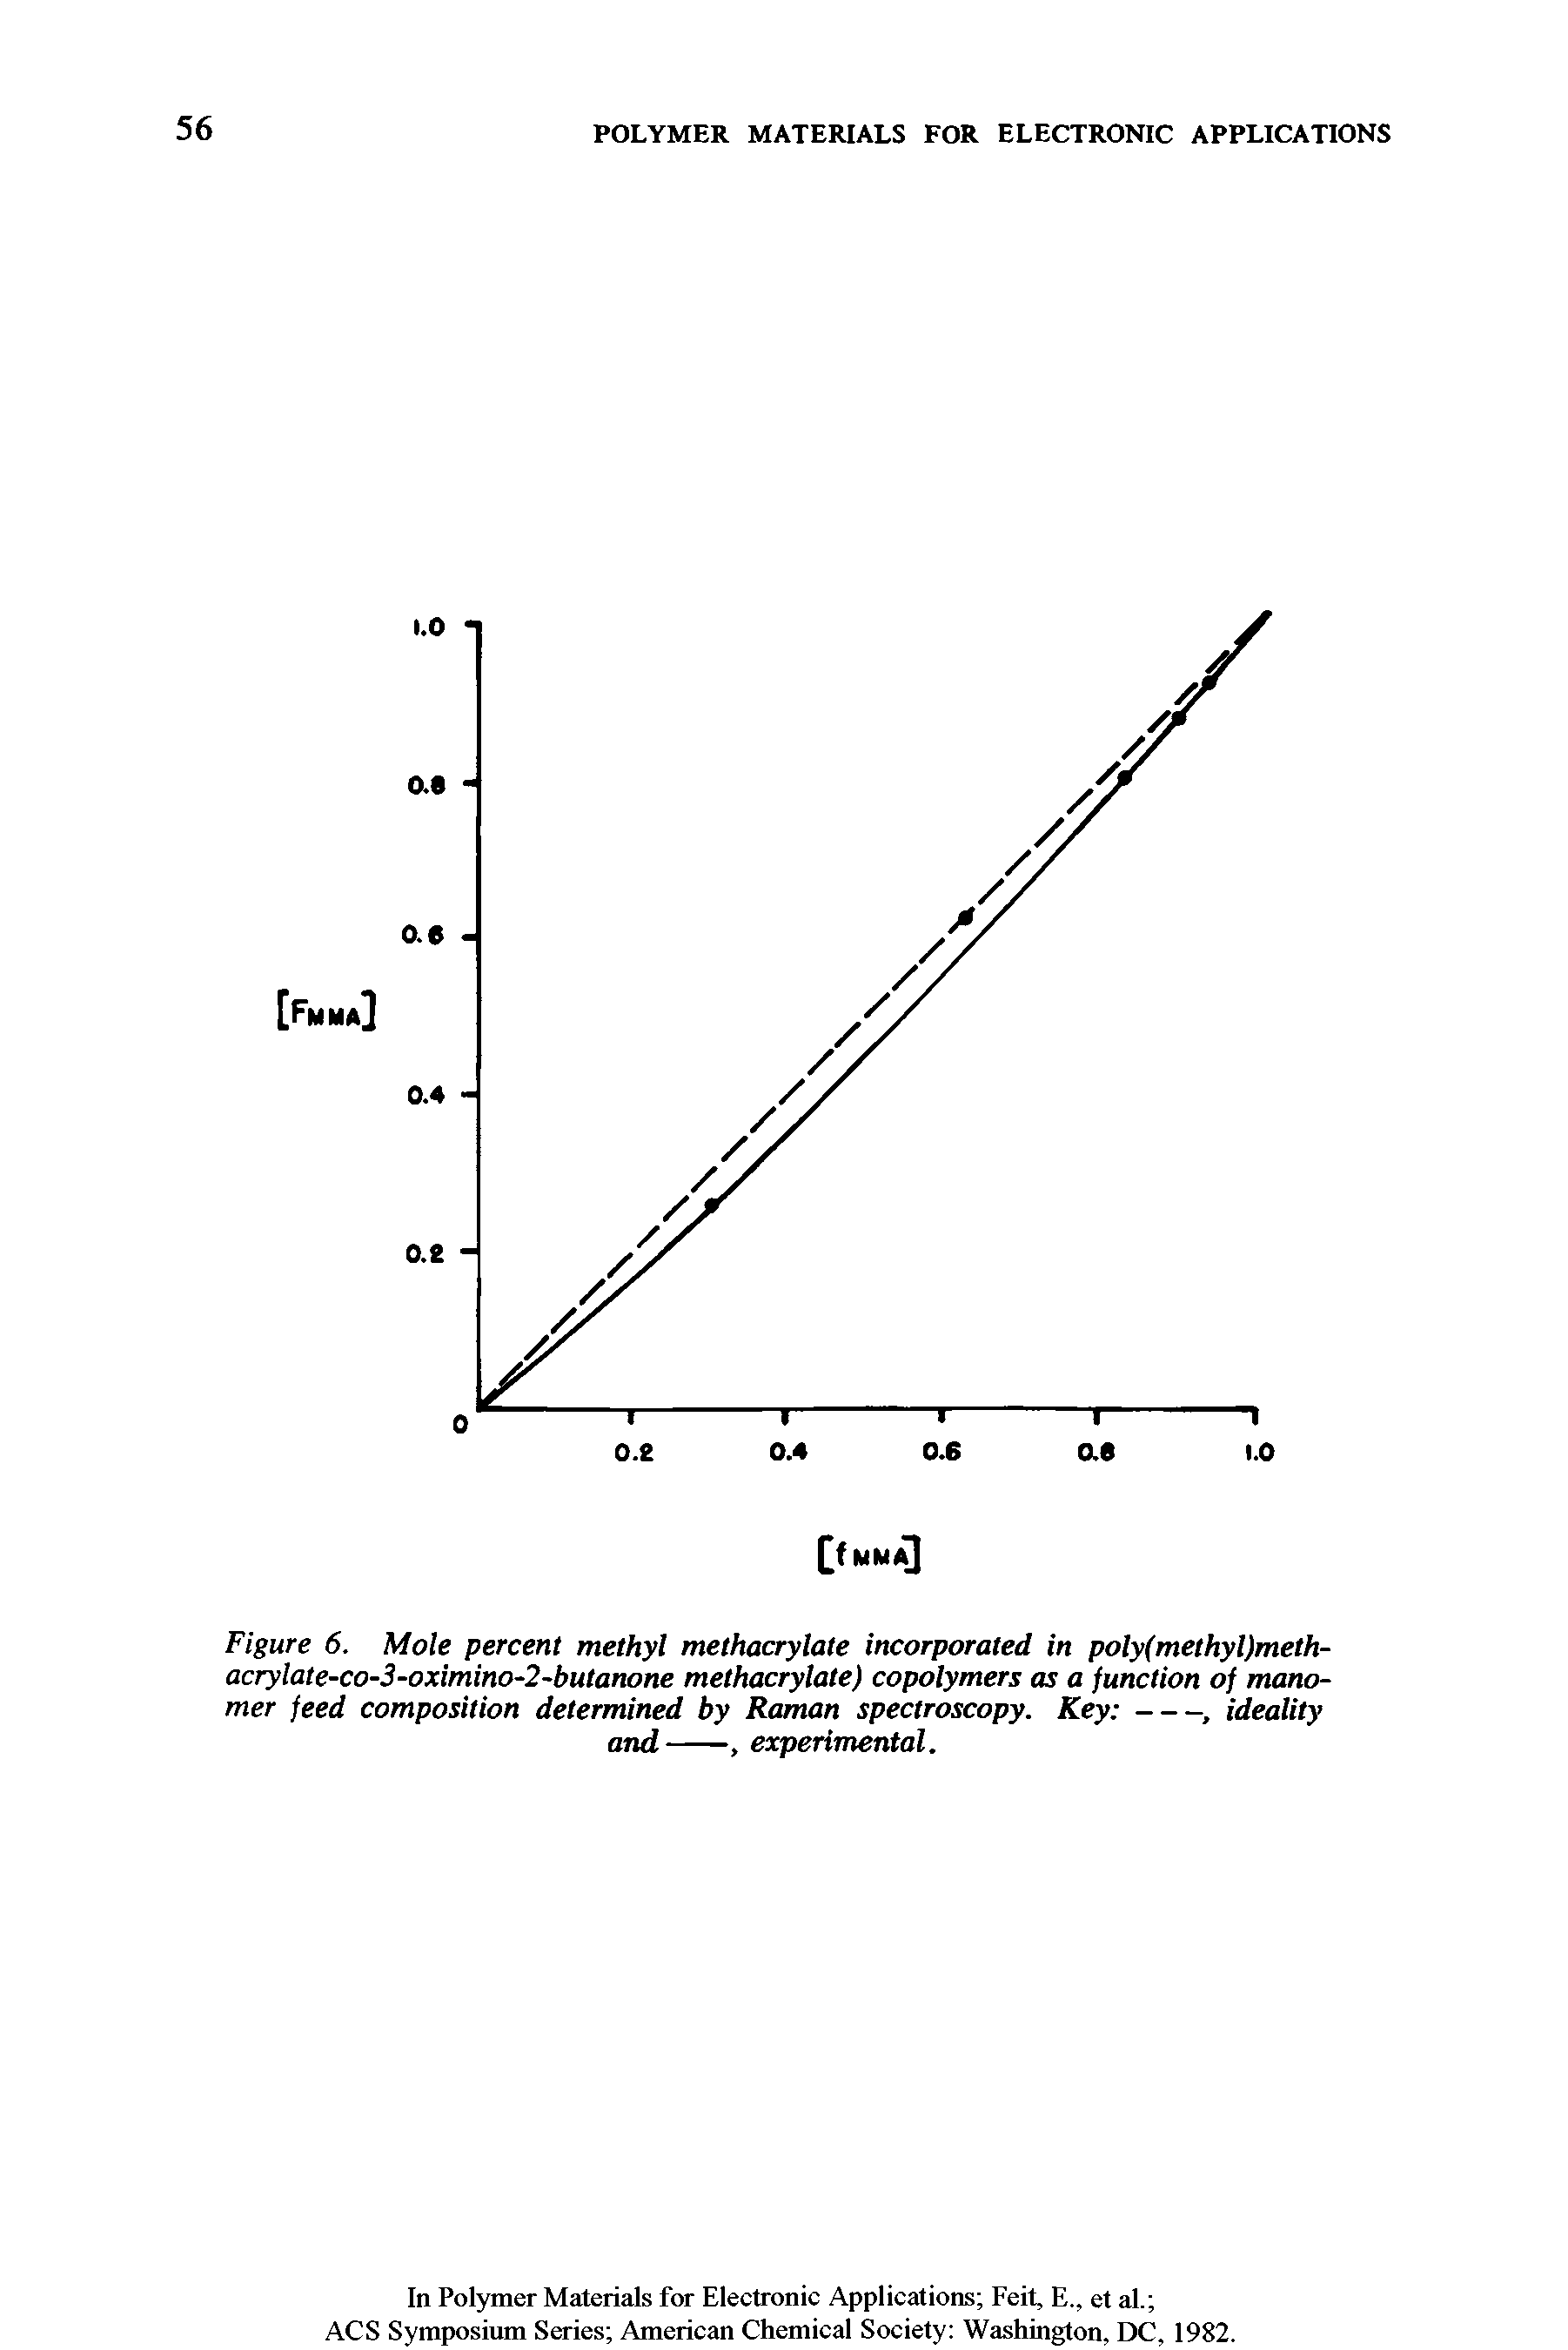 Figure 6. Mole percent methyl methacrylate incorporated in poly(methyl)meth-acrylate-co-3-oximino-2-butanone methacrylate) copolymers as a function of monomer feed composition determined by Raman spectroscopy. Key -----------ideality...